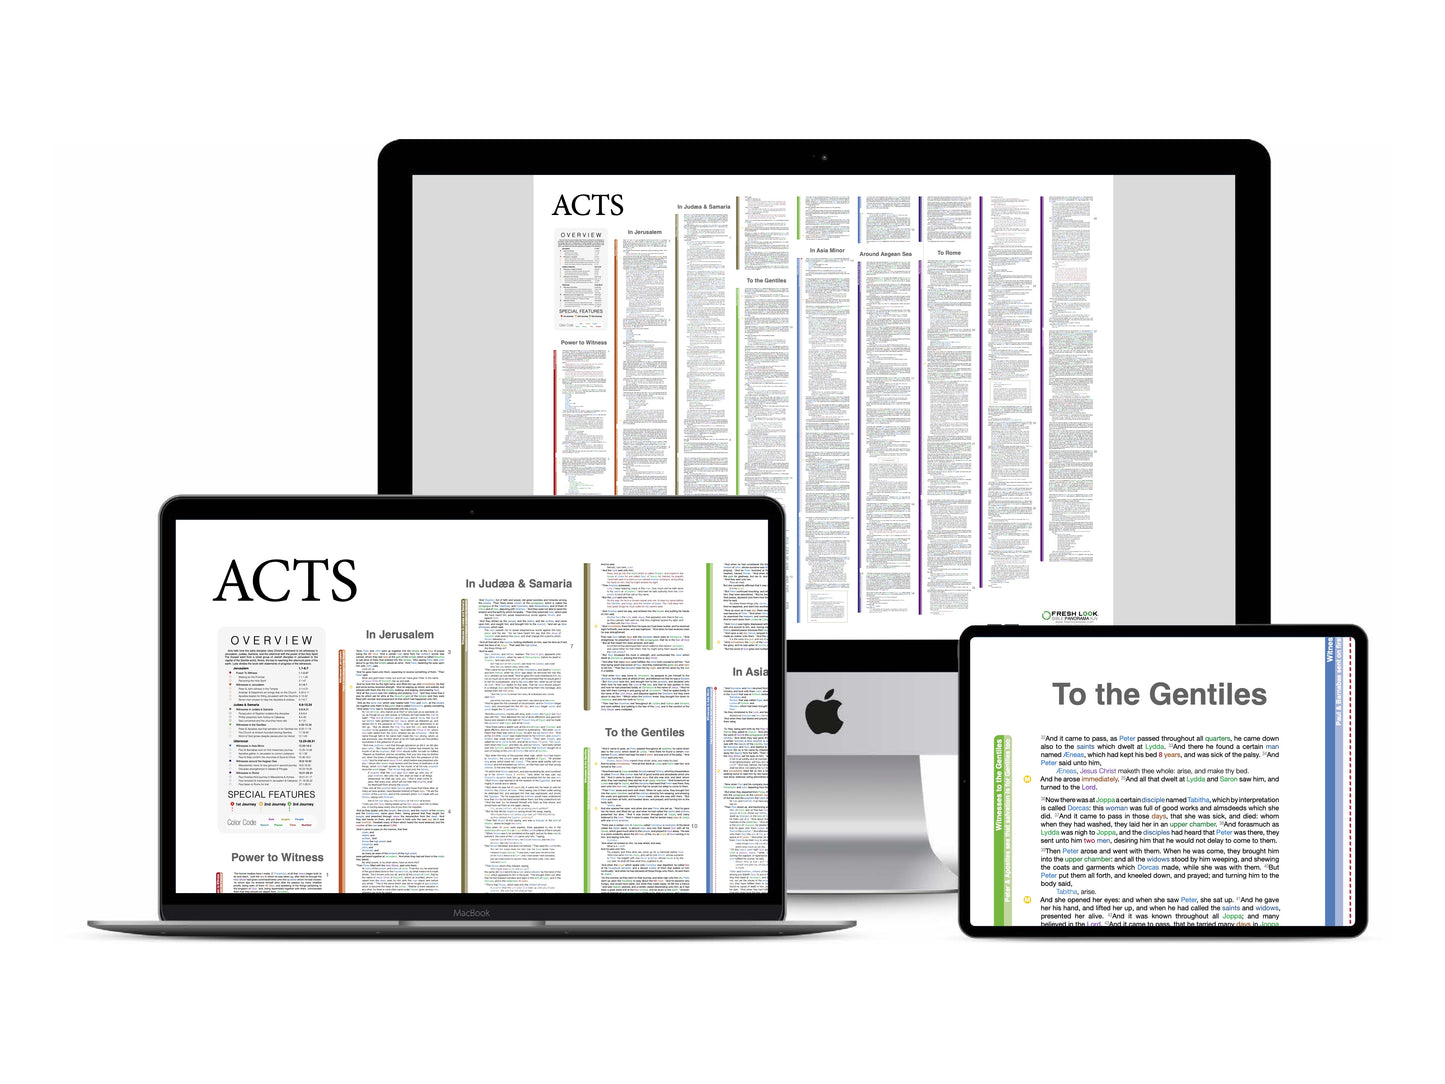 Acts Panorama PDF